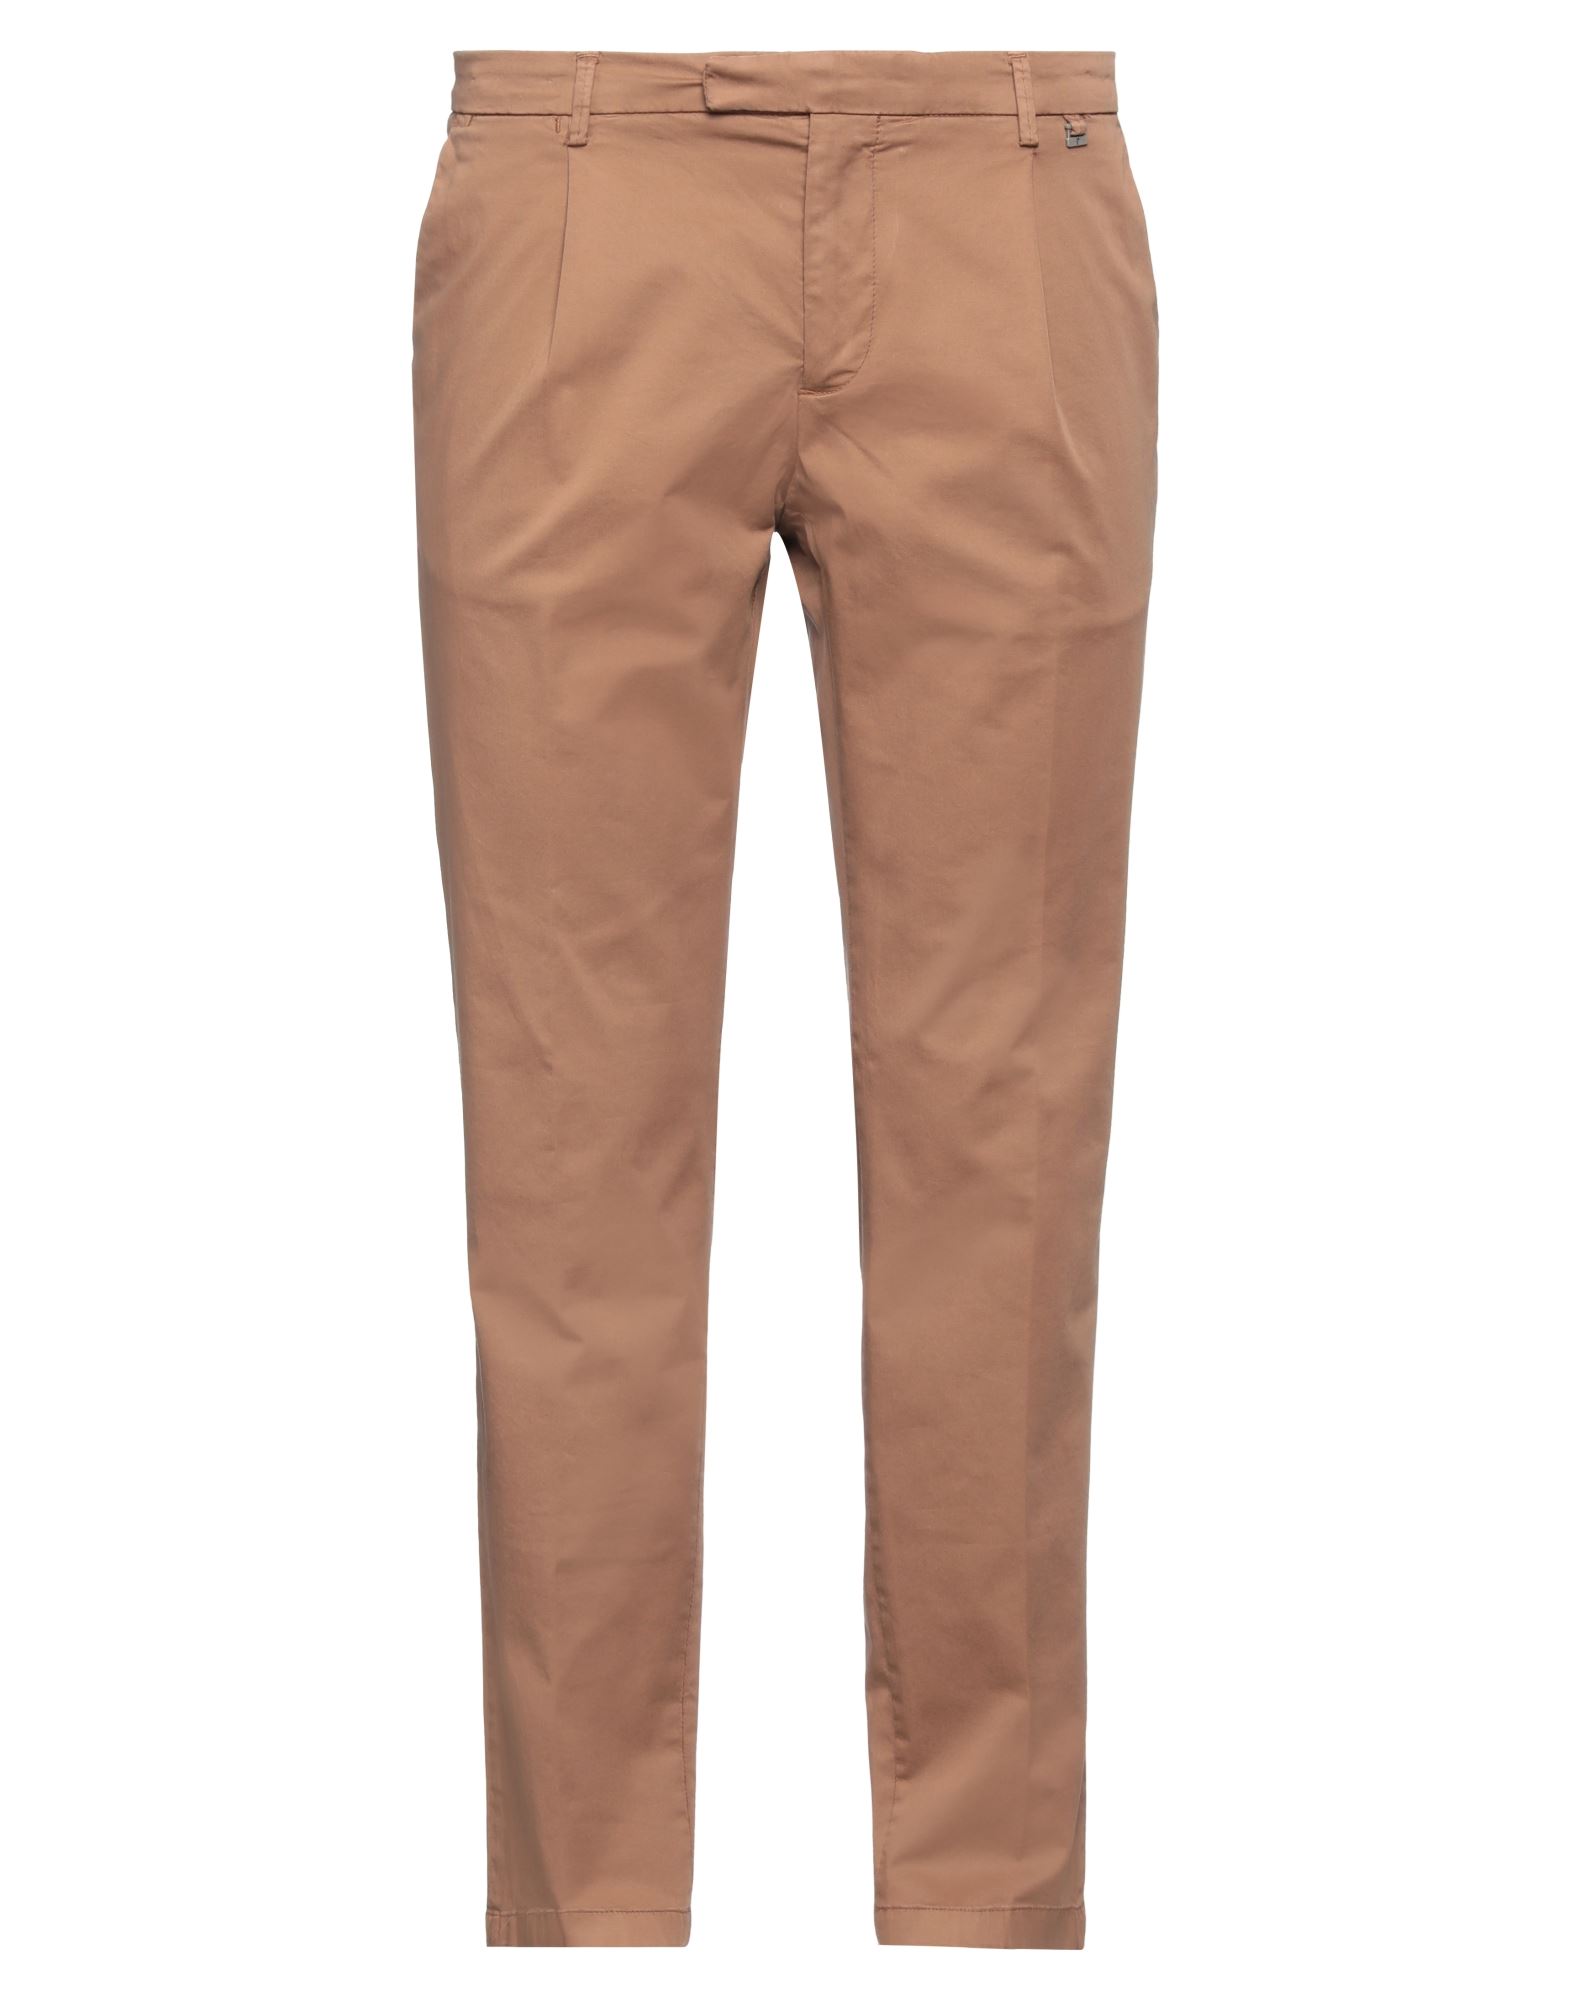 Paoloni Pants In Brown